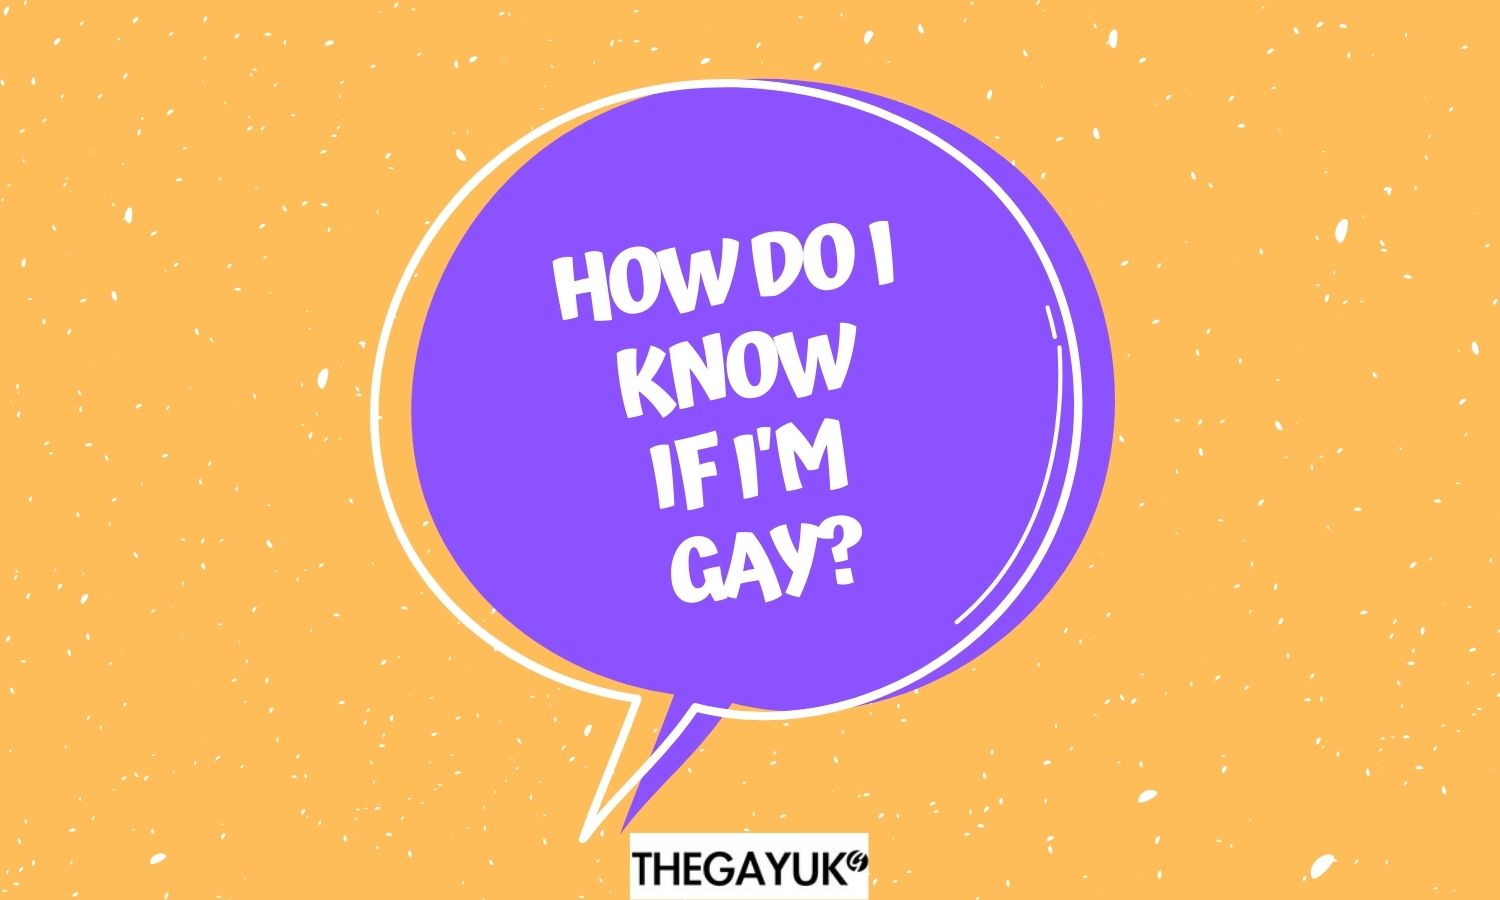 How can I tell if I’m gay or not?